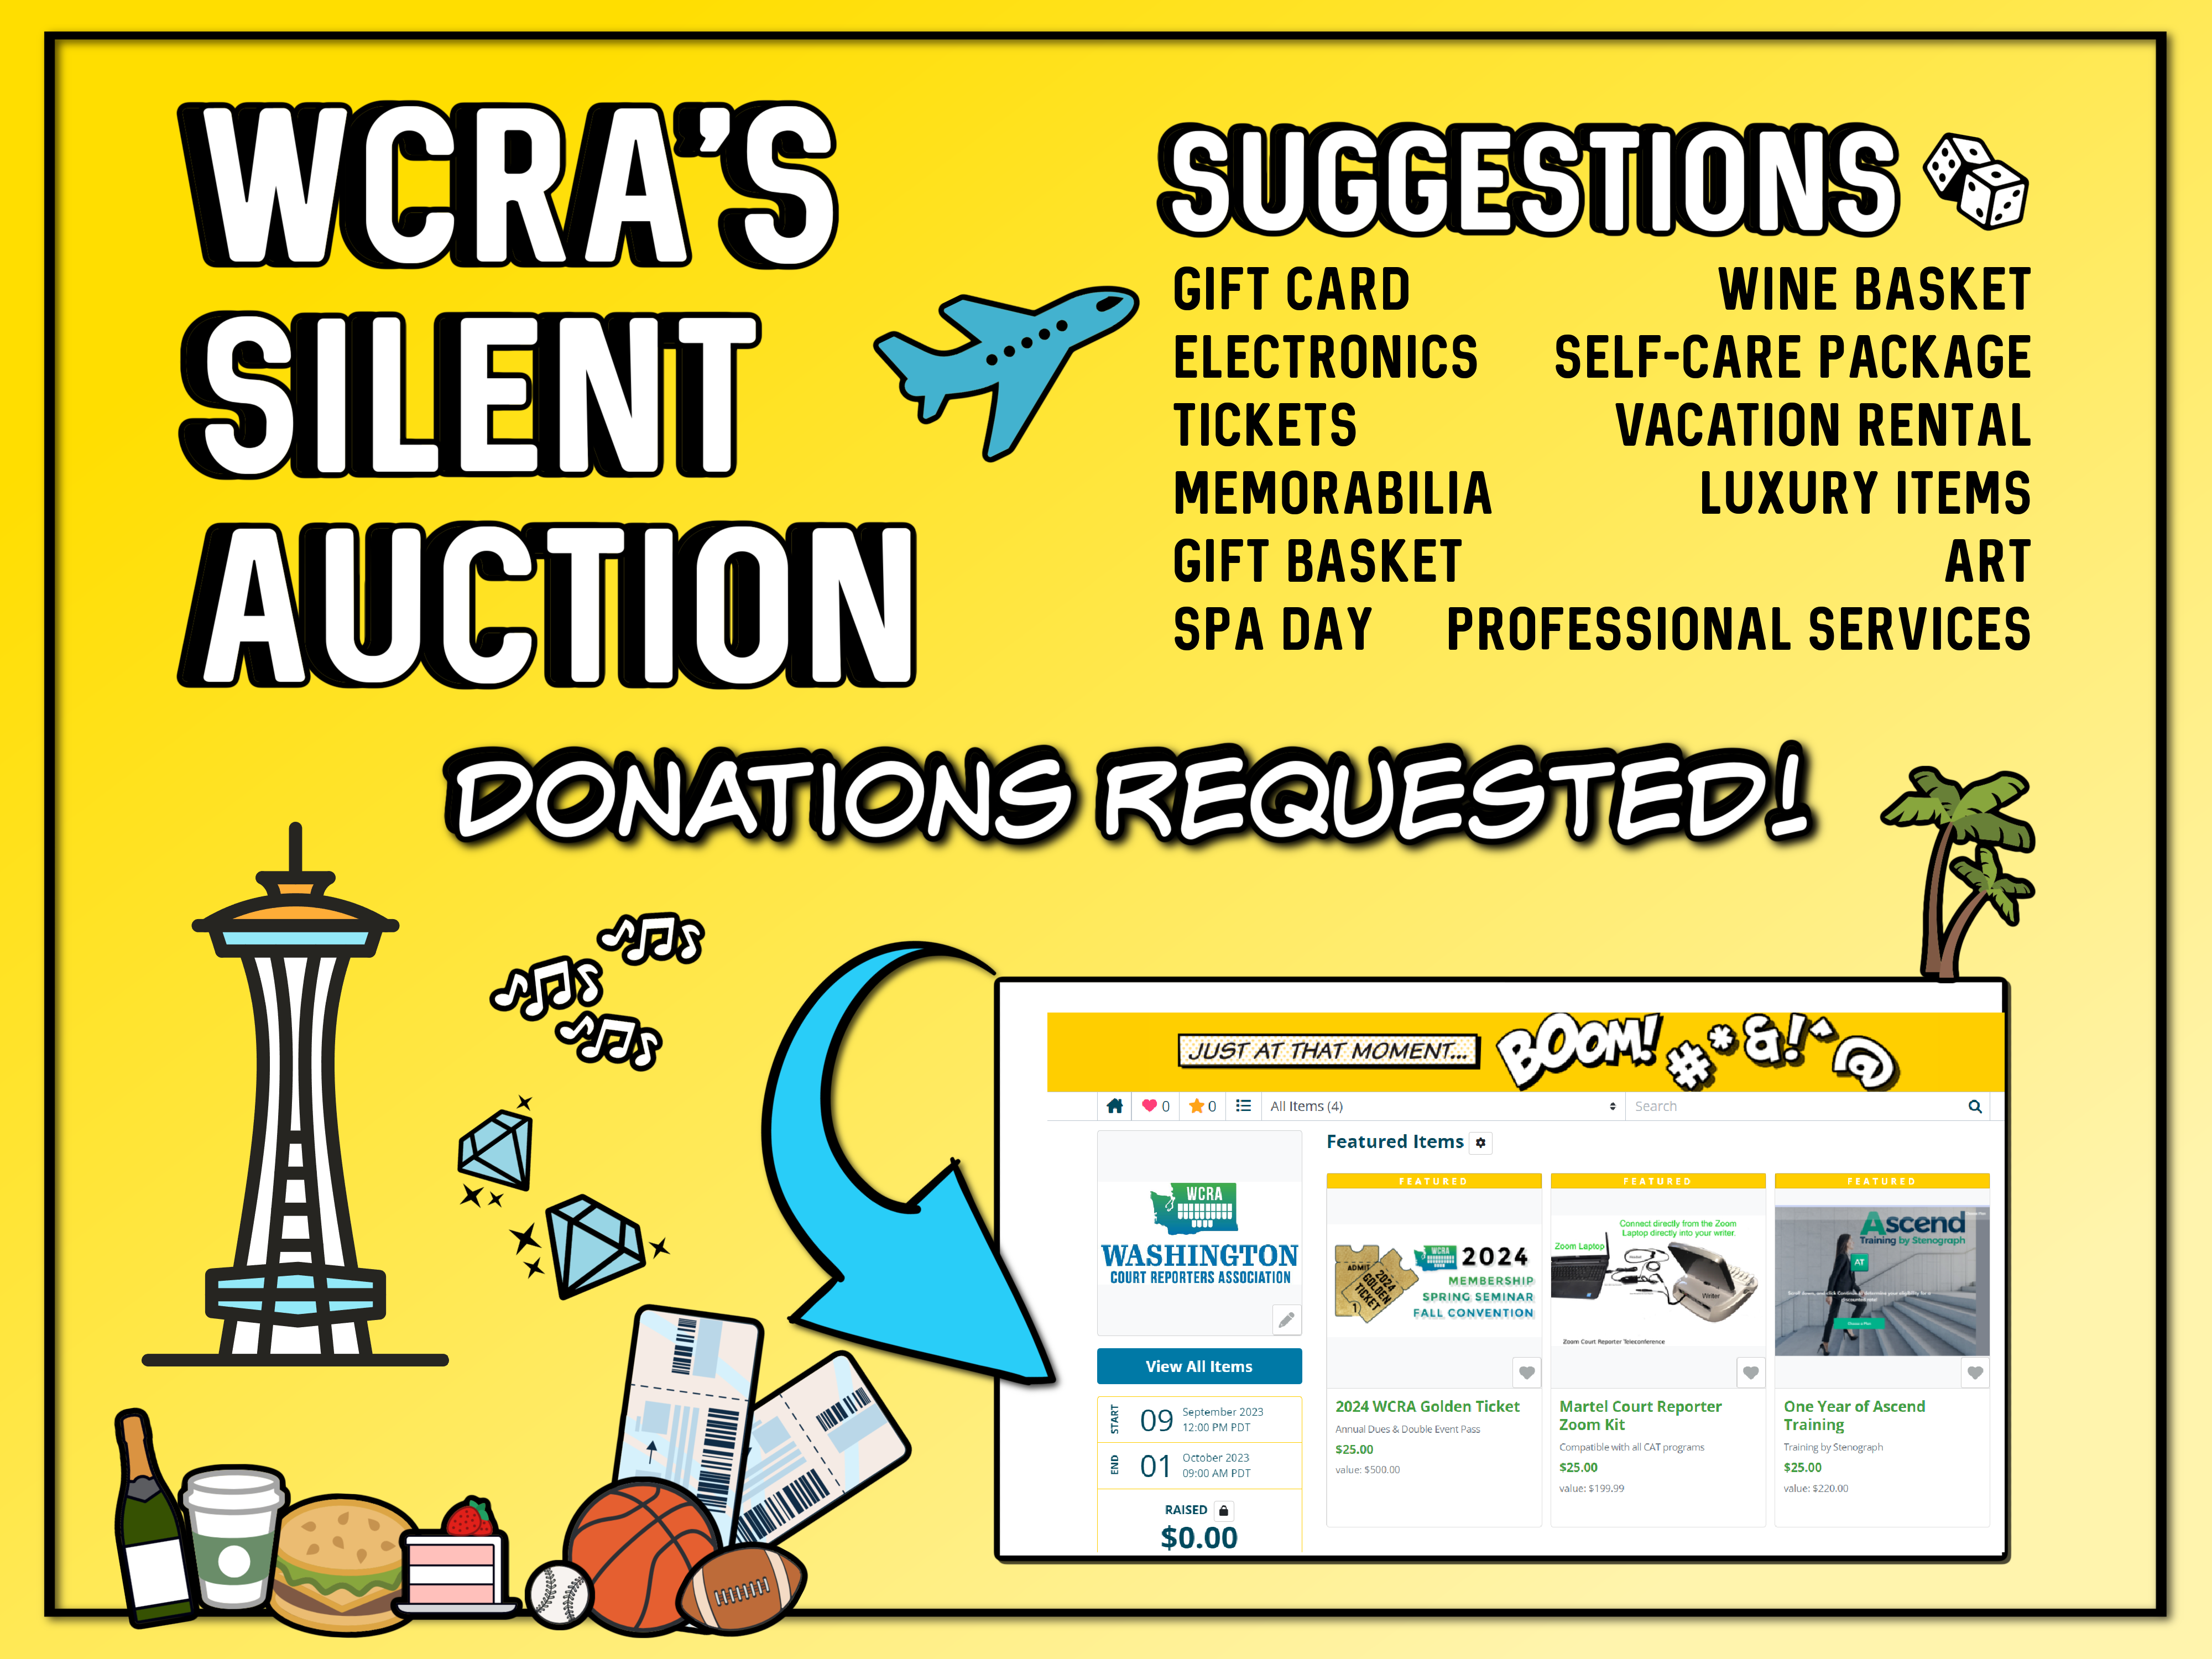 WCRA is asking for silent auction donations.  Bright yellow background with several items like sports balls, tickets, the Seattle space needle, and some musical notes.  There's also a screenshot of the auction platform WCRA is using with an arrow pointing towards it.